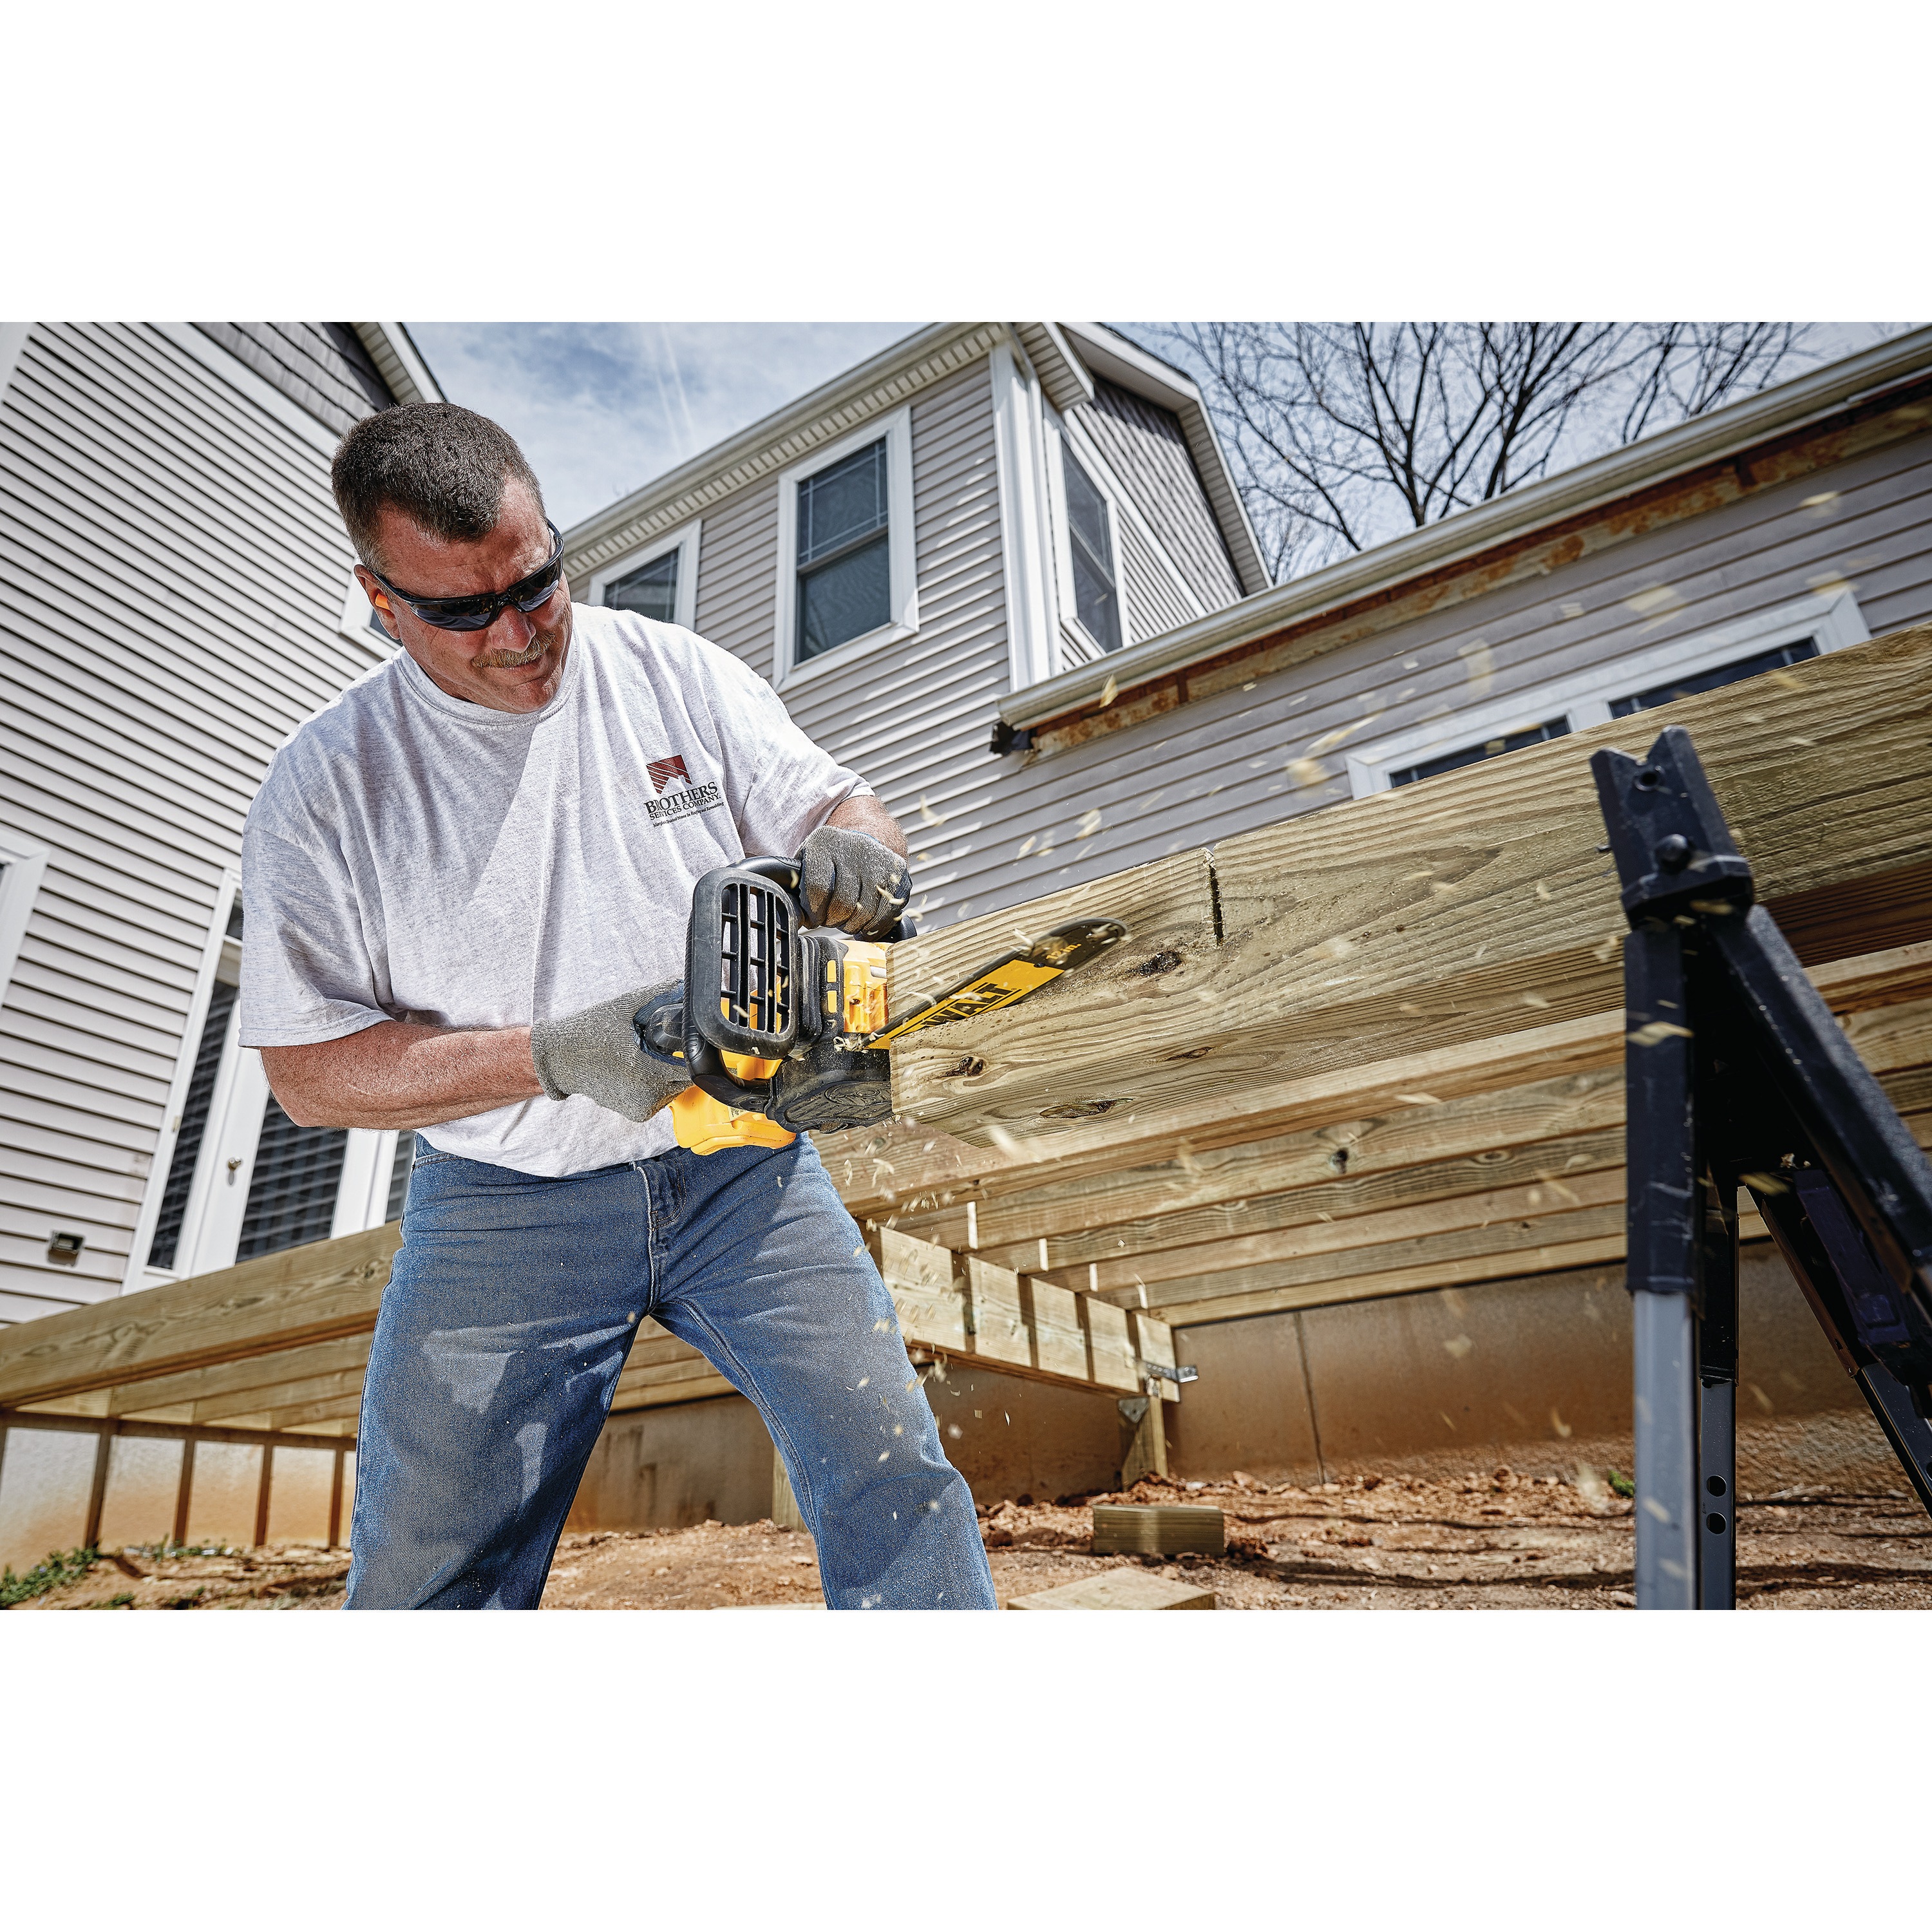 XR® Compact 12 inch Cordless Chainsaw being used by a person to cut through a square log of wood at a worksite 